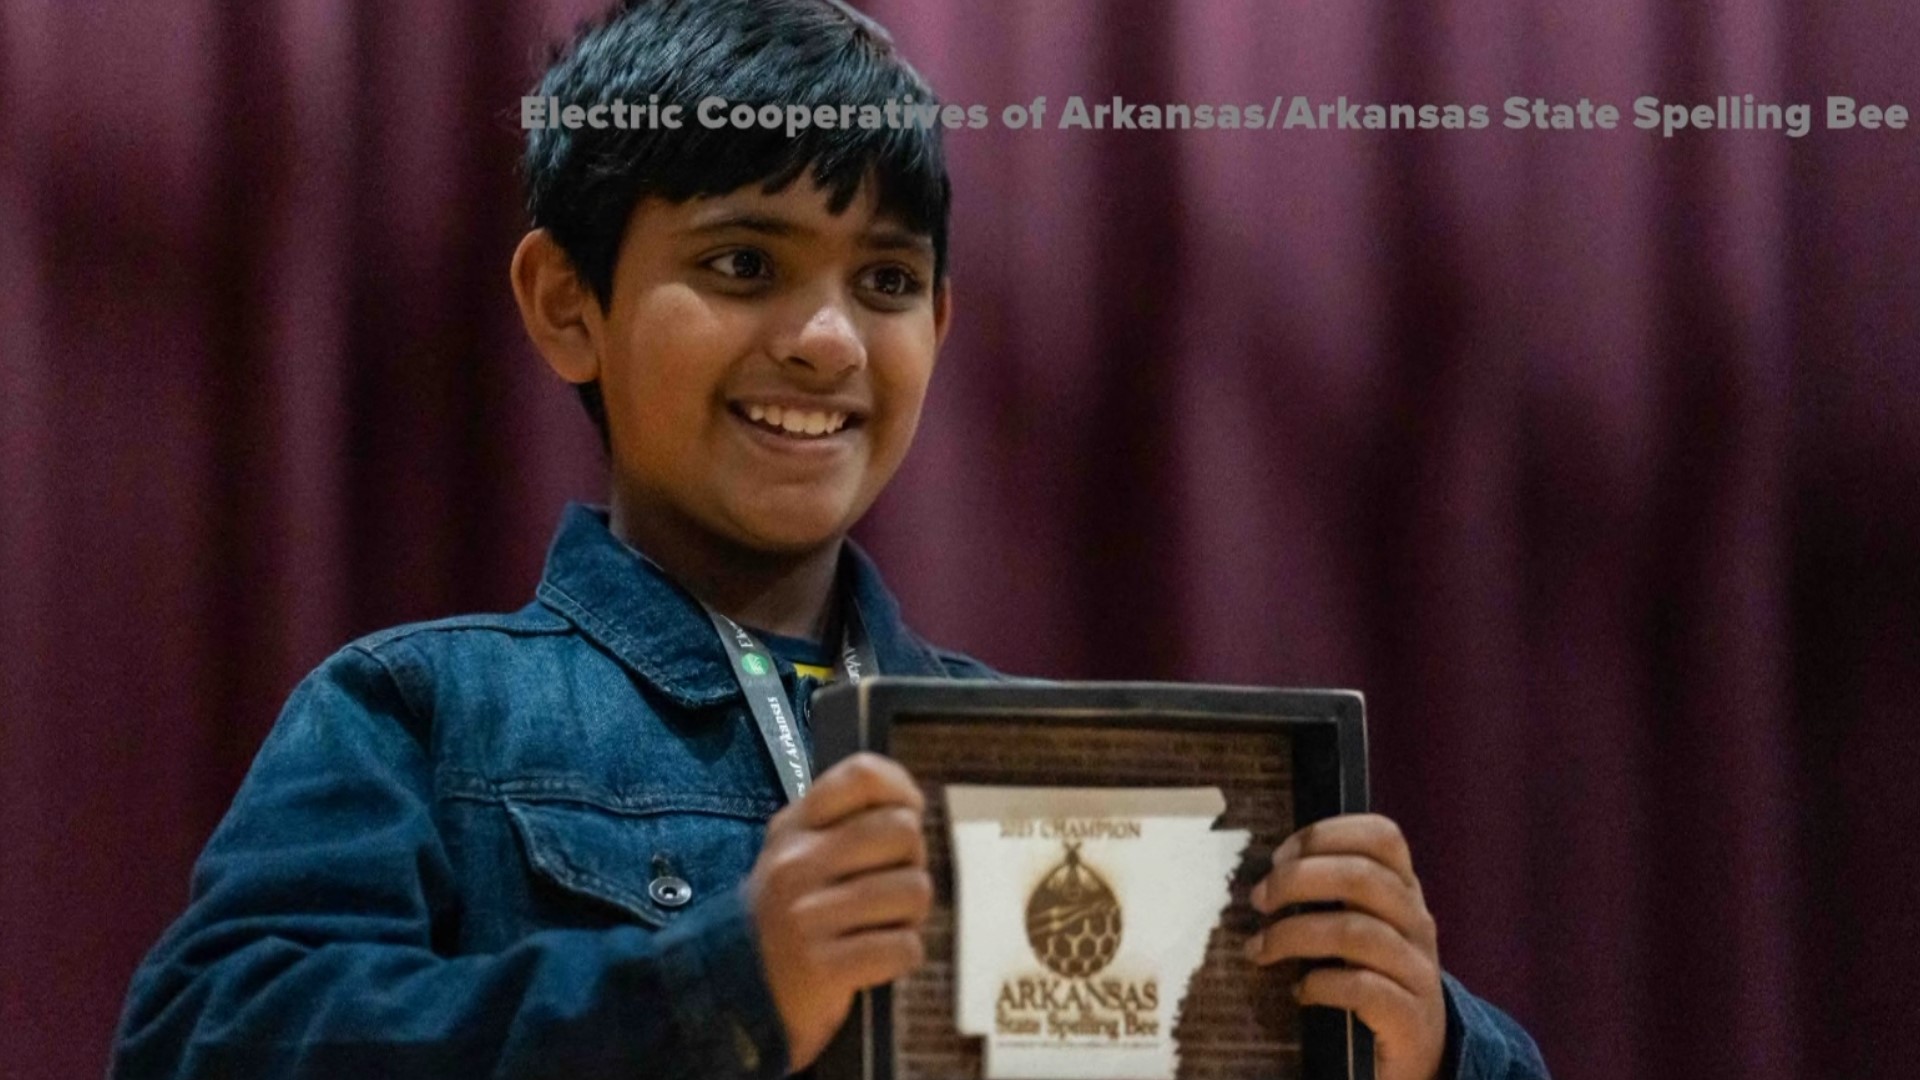 A student from Woods Elementary in Fort Smith is headed to the National Spelling Bee after winning the Arkansas State Spelling Bee.